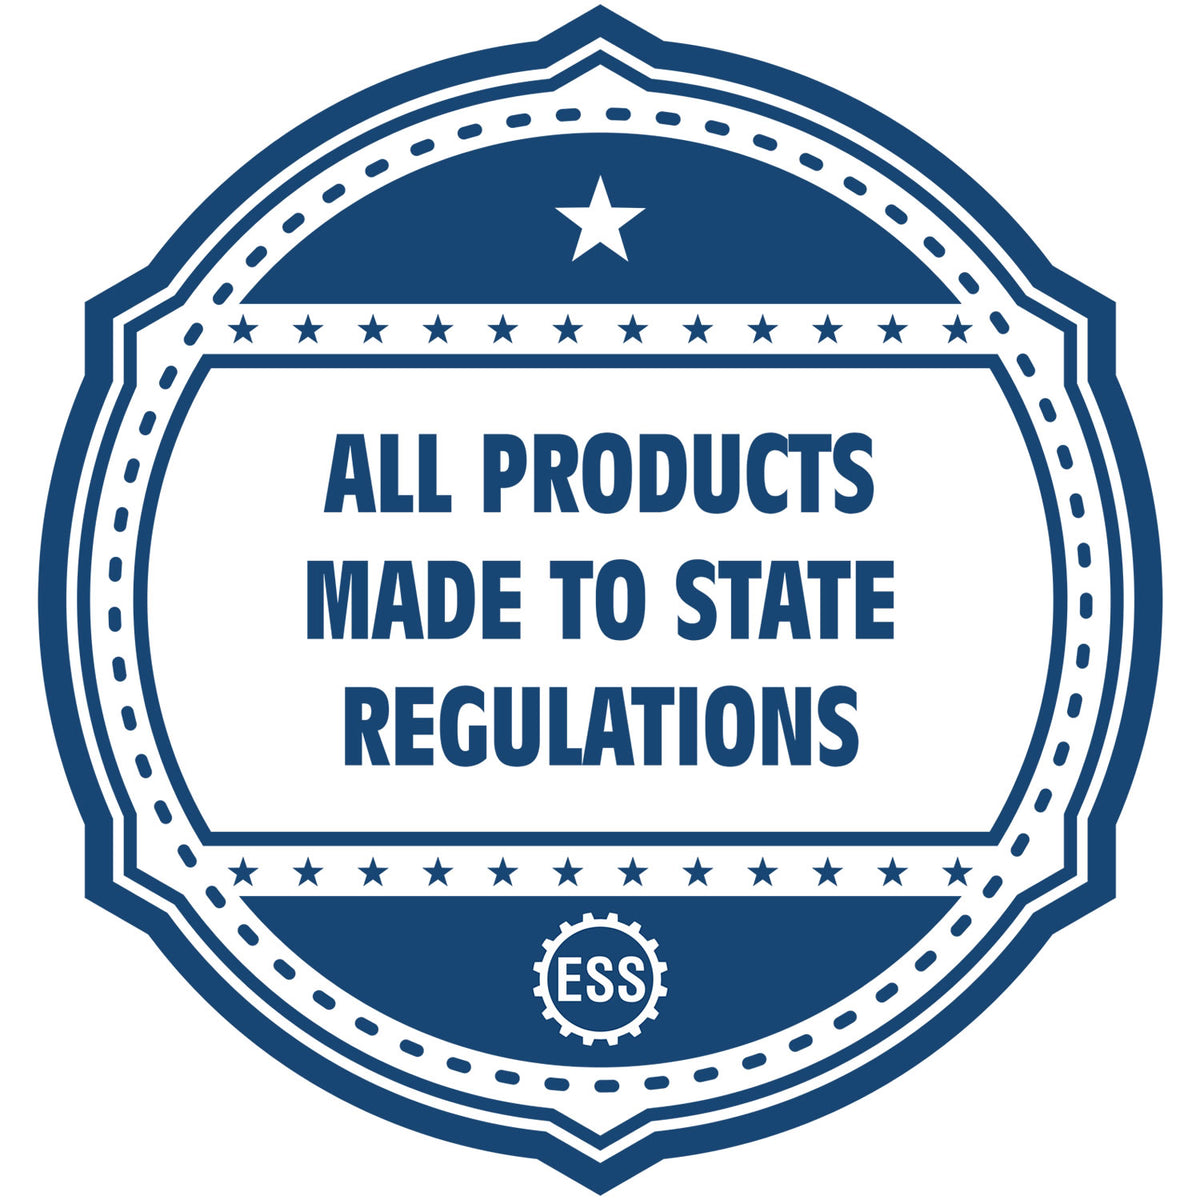 An icon or badge element for the Slim Pre-Inked State Seal Notary Stamp for Kansas showing that this product is made in compliance with state regulations.